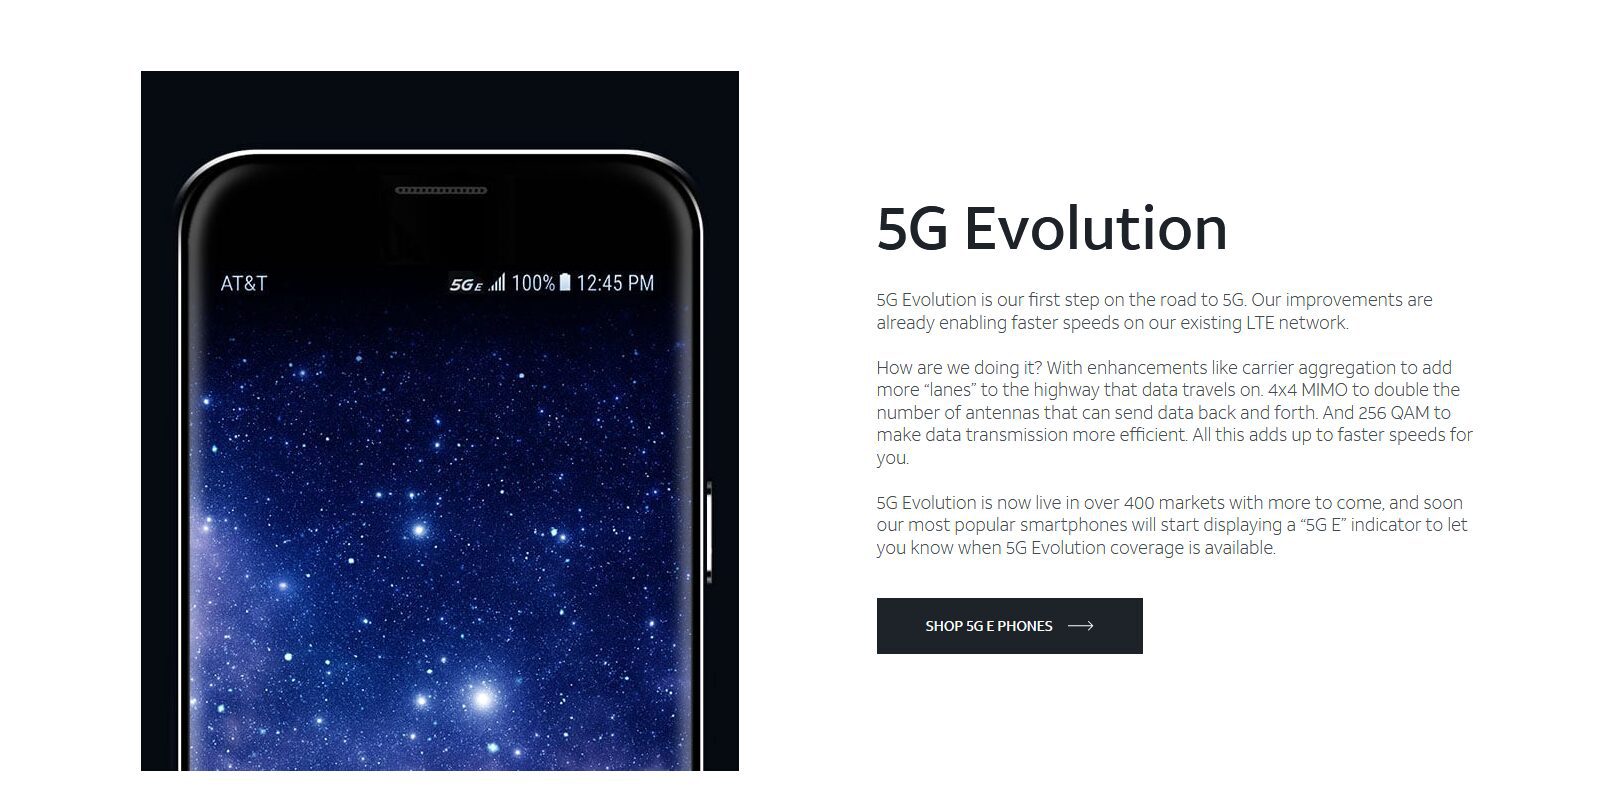 Sprint Sues AT&T Over Fake 5G Branding